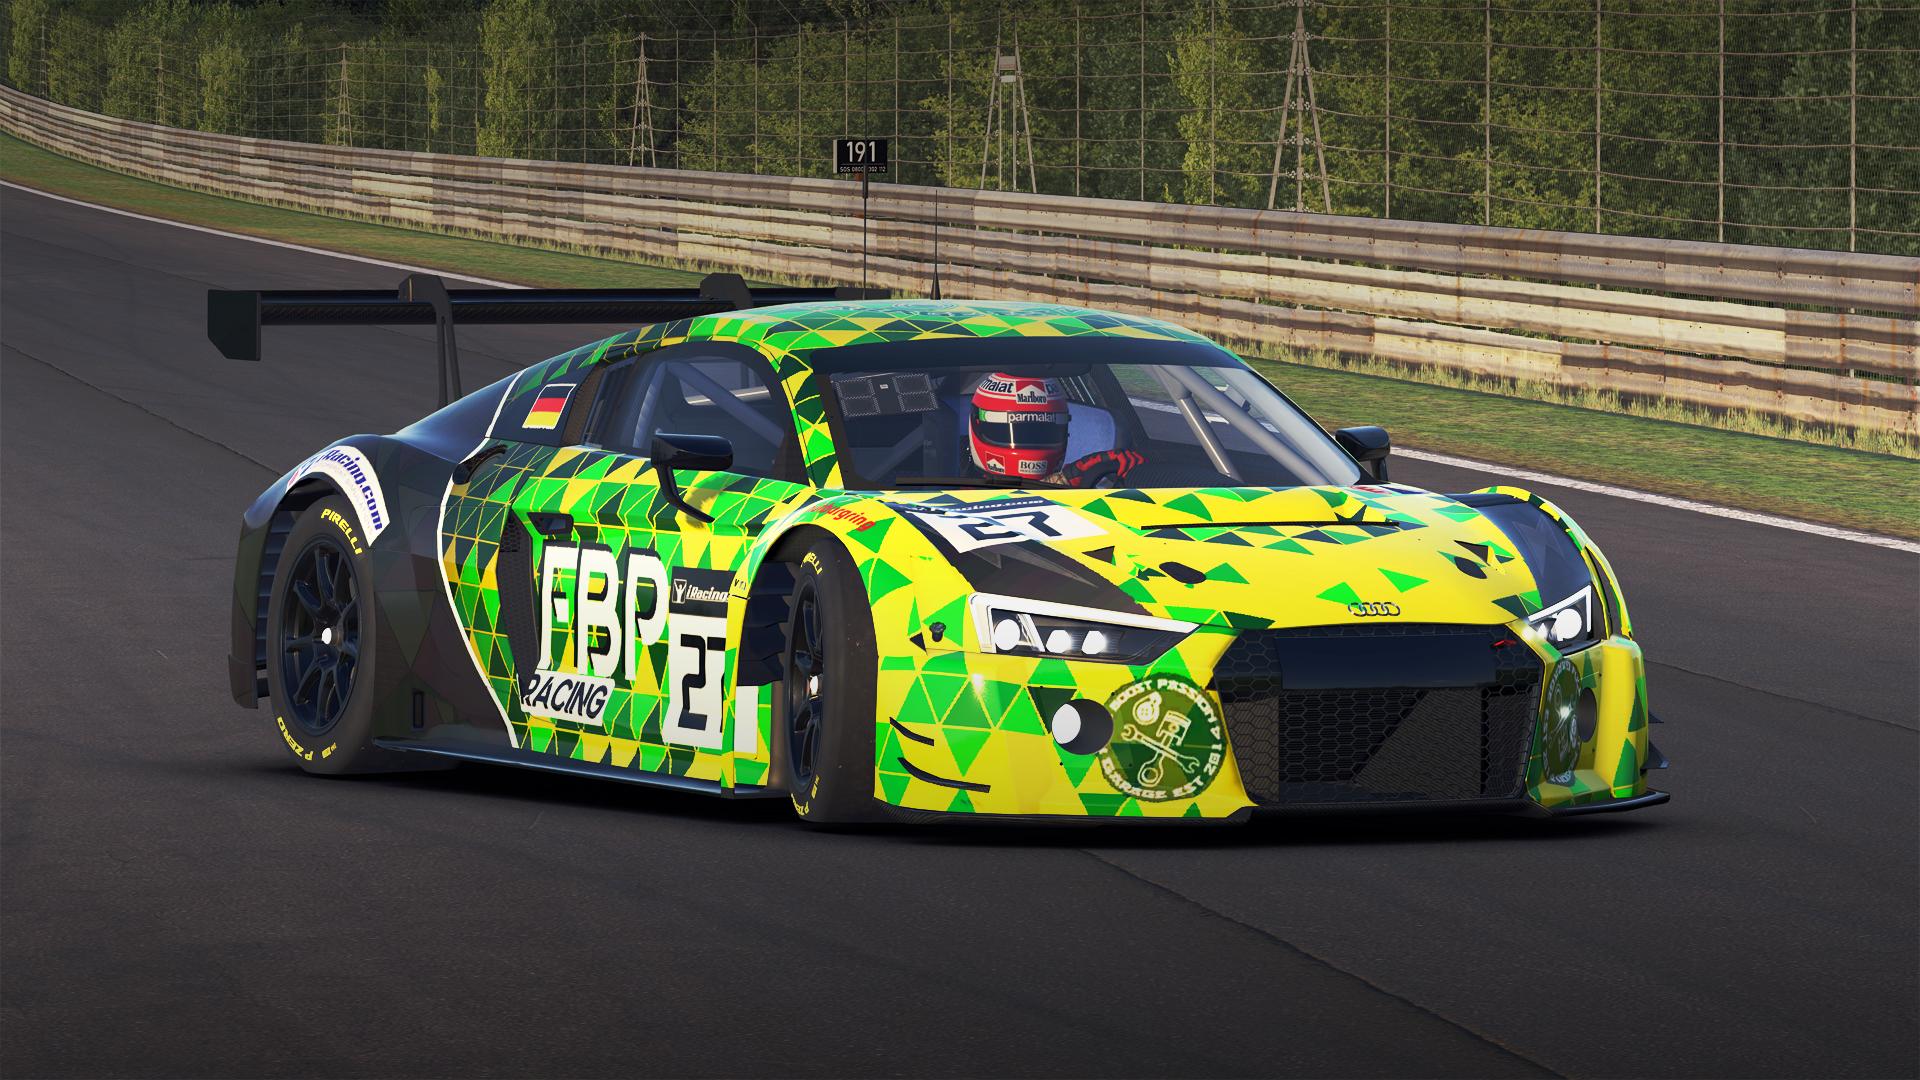 FBP Racing 2019 | Audi R8 LMS GT3 by Evan Dietzold - Trading Paints